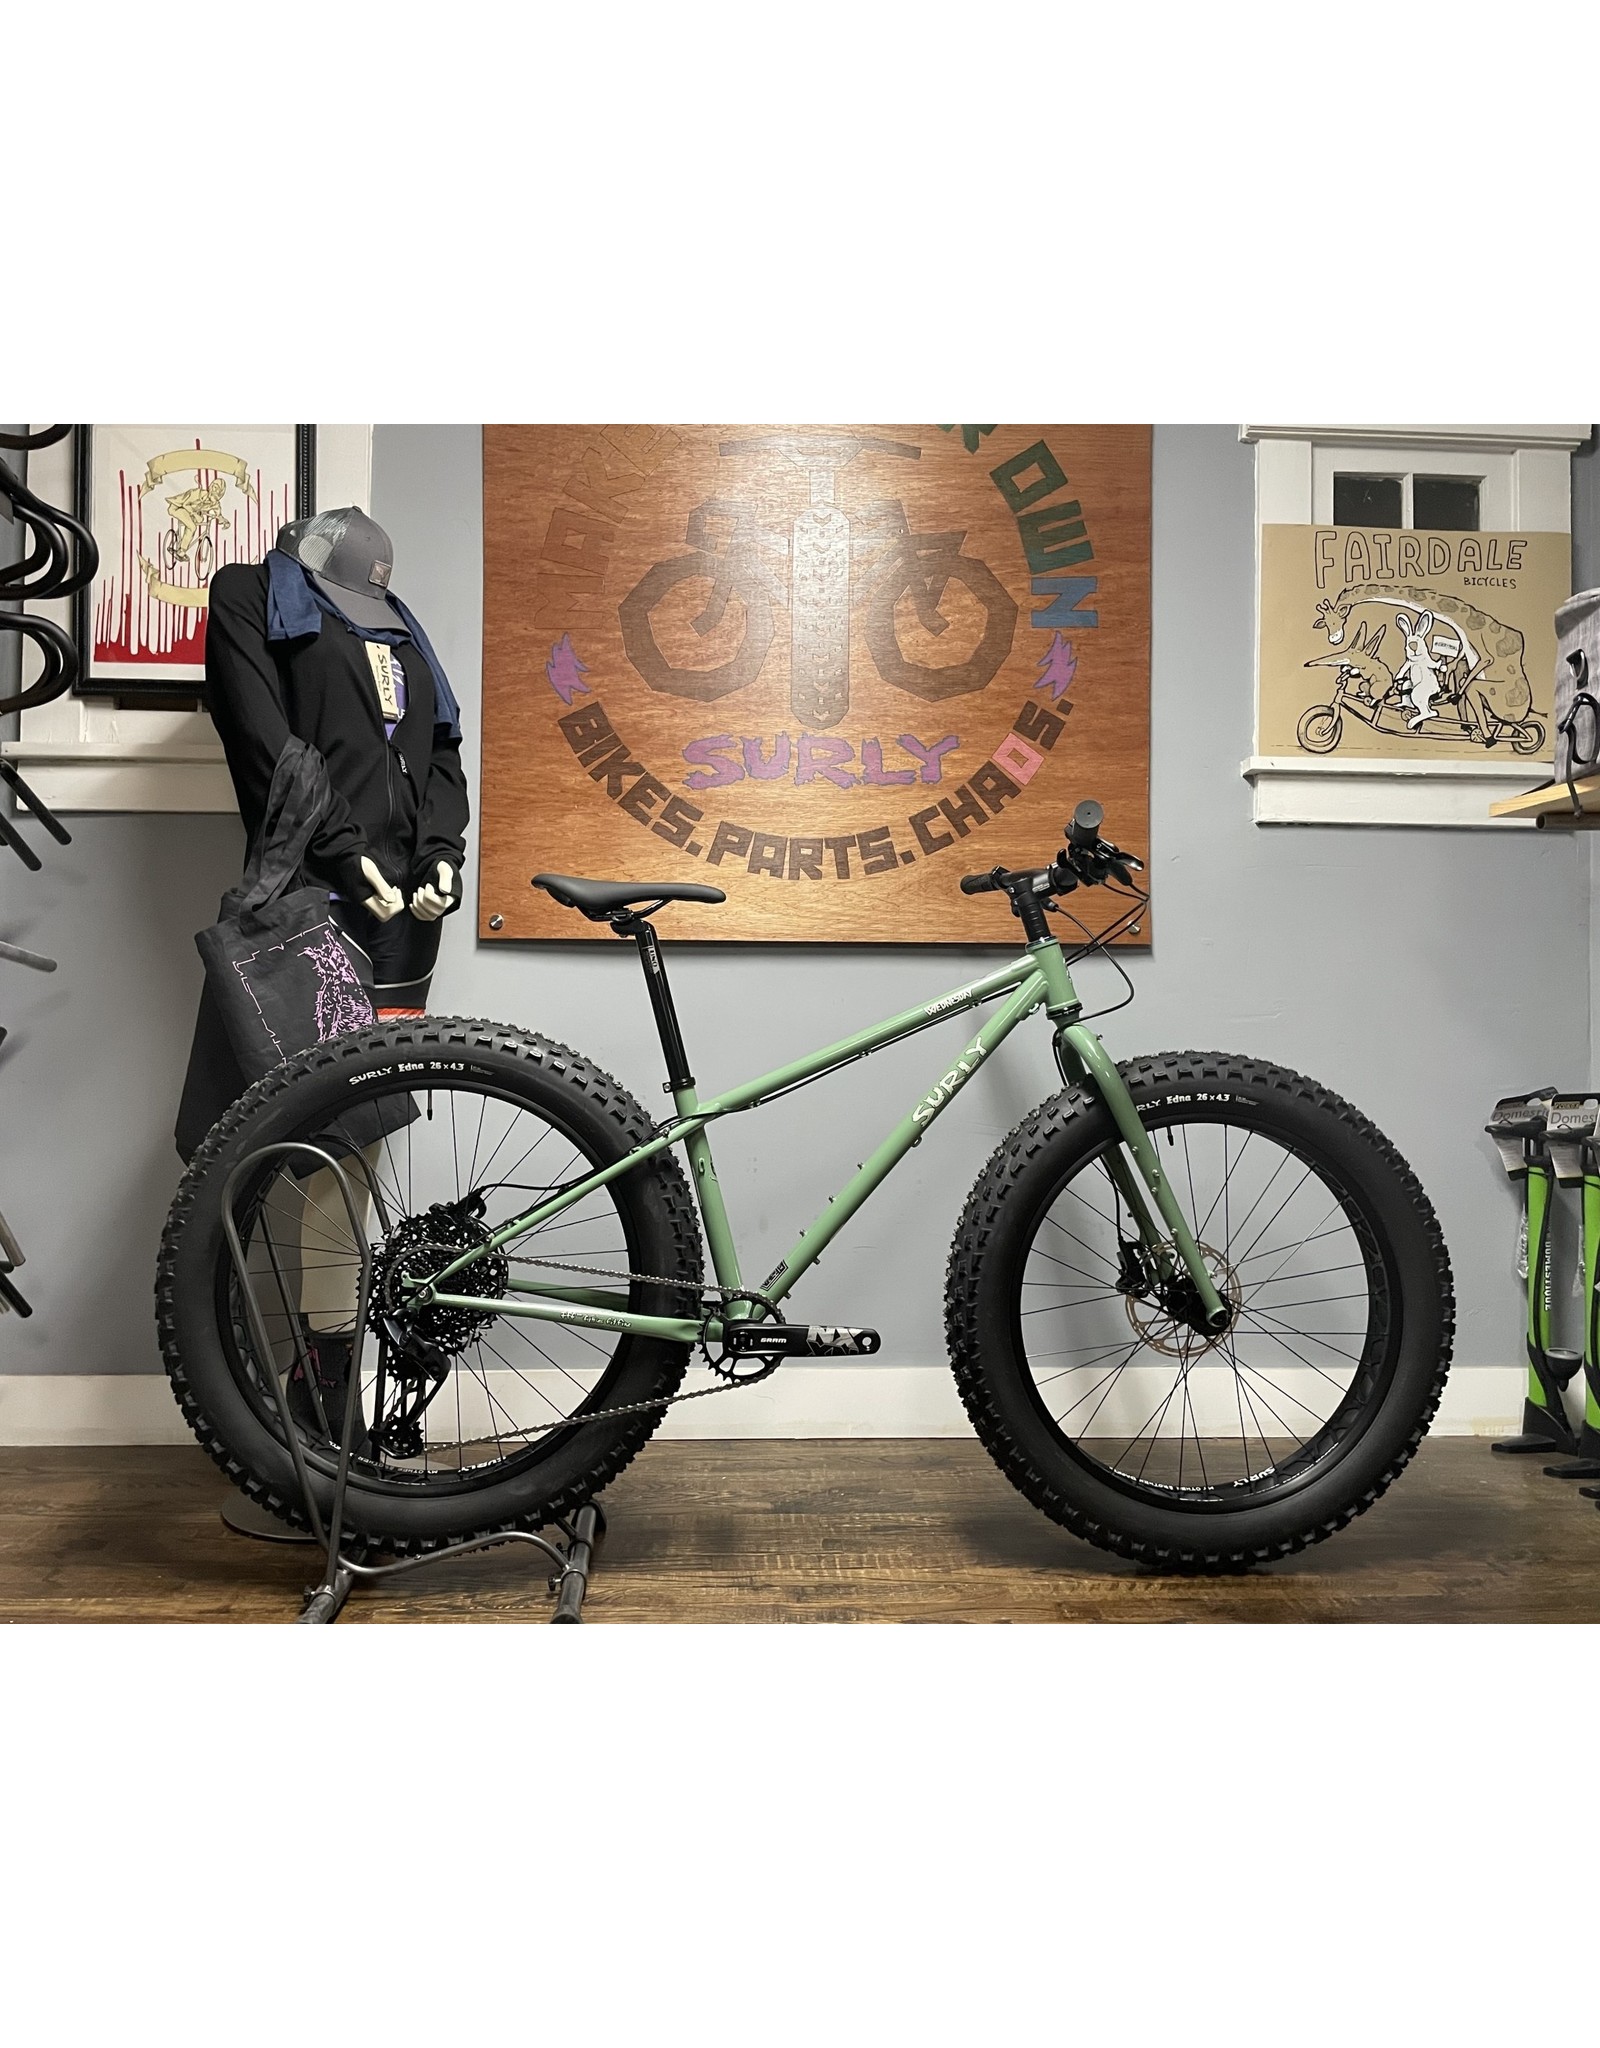 Surly Surly Wednesday Shawp! Build SM